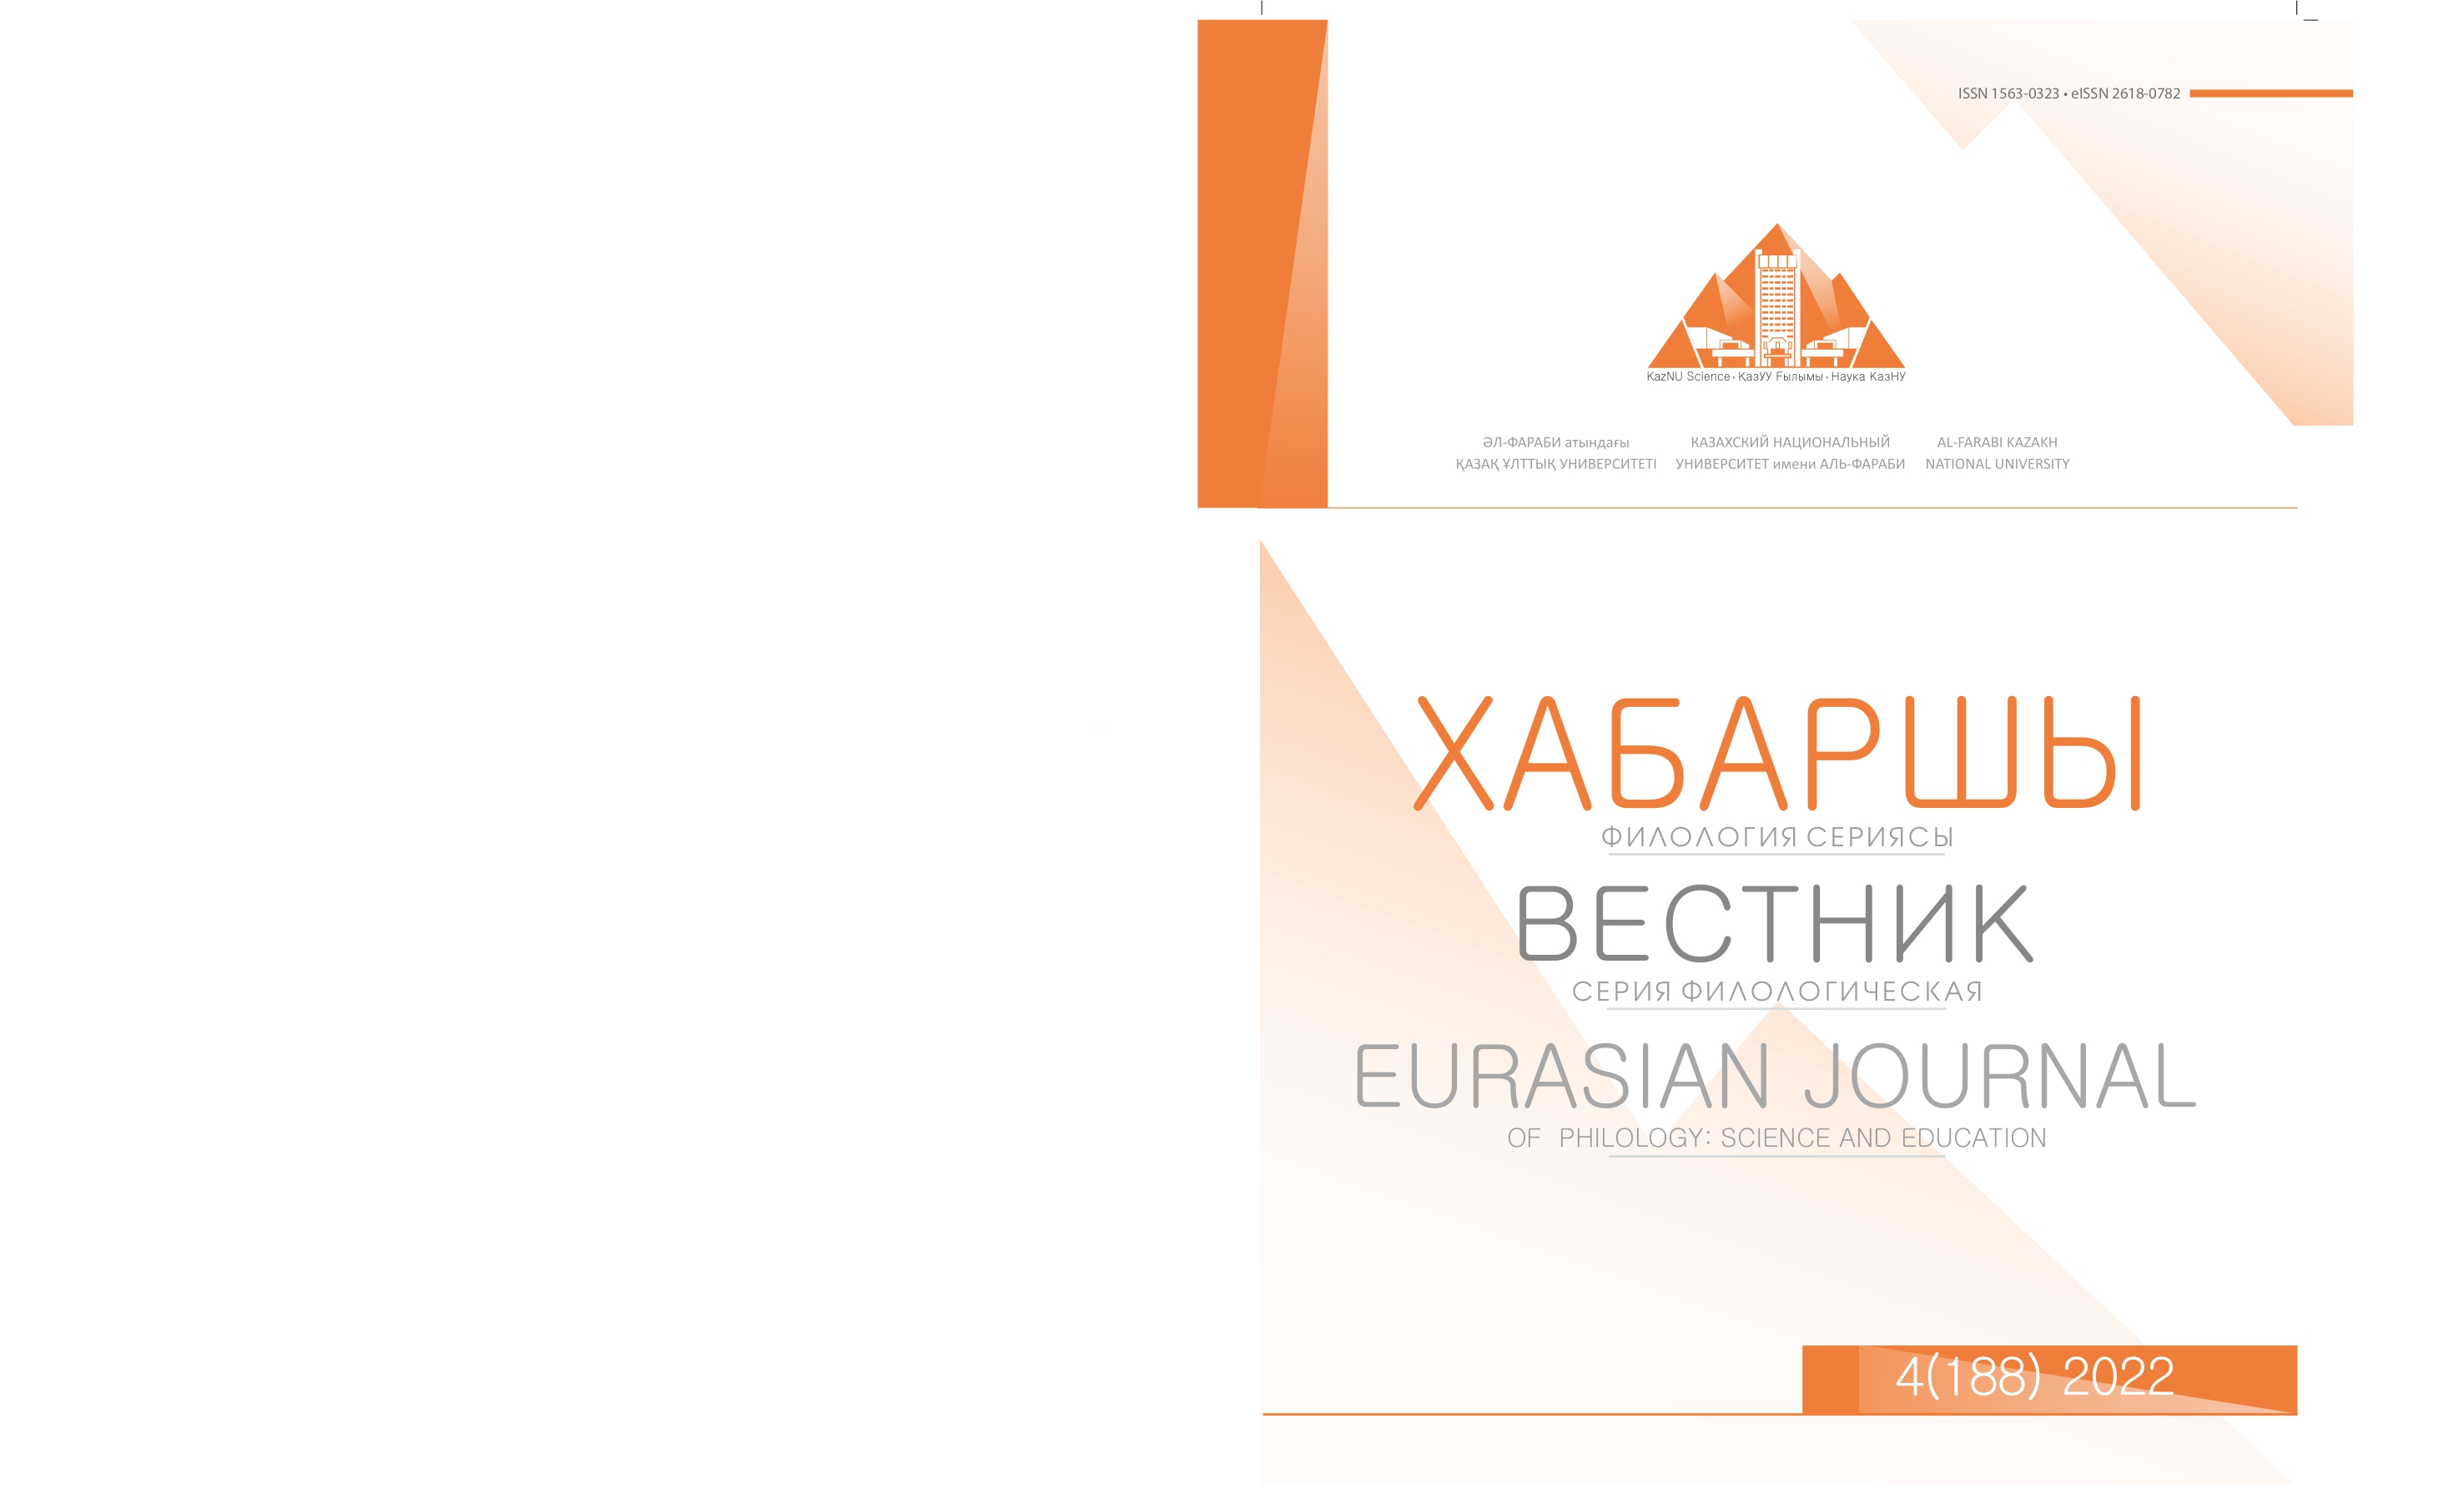 					View Vol. 188 No. 4 (2022): Eurasian Journal of Philology: Science and Education
				